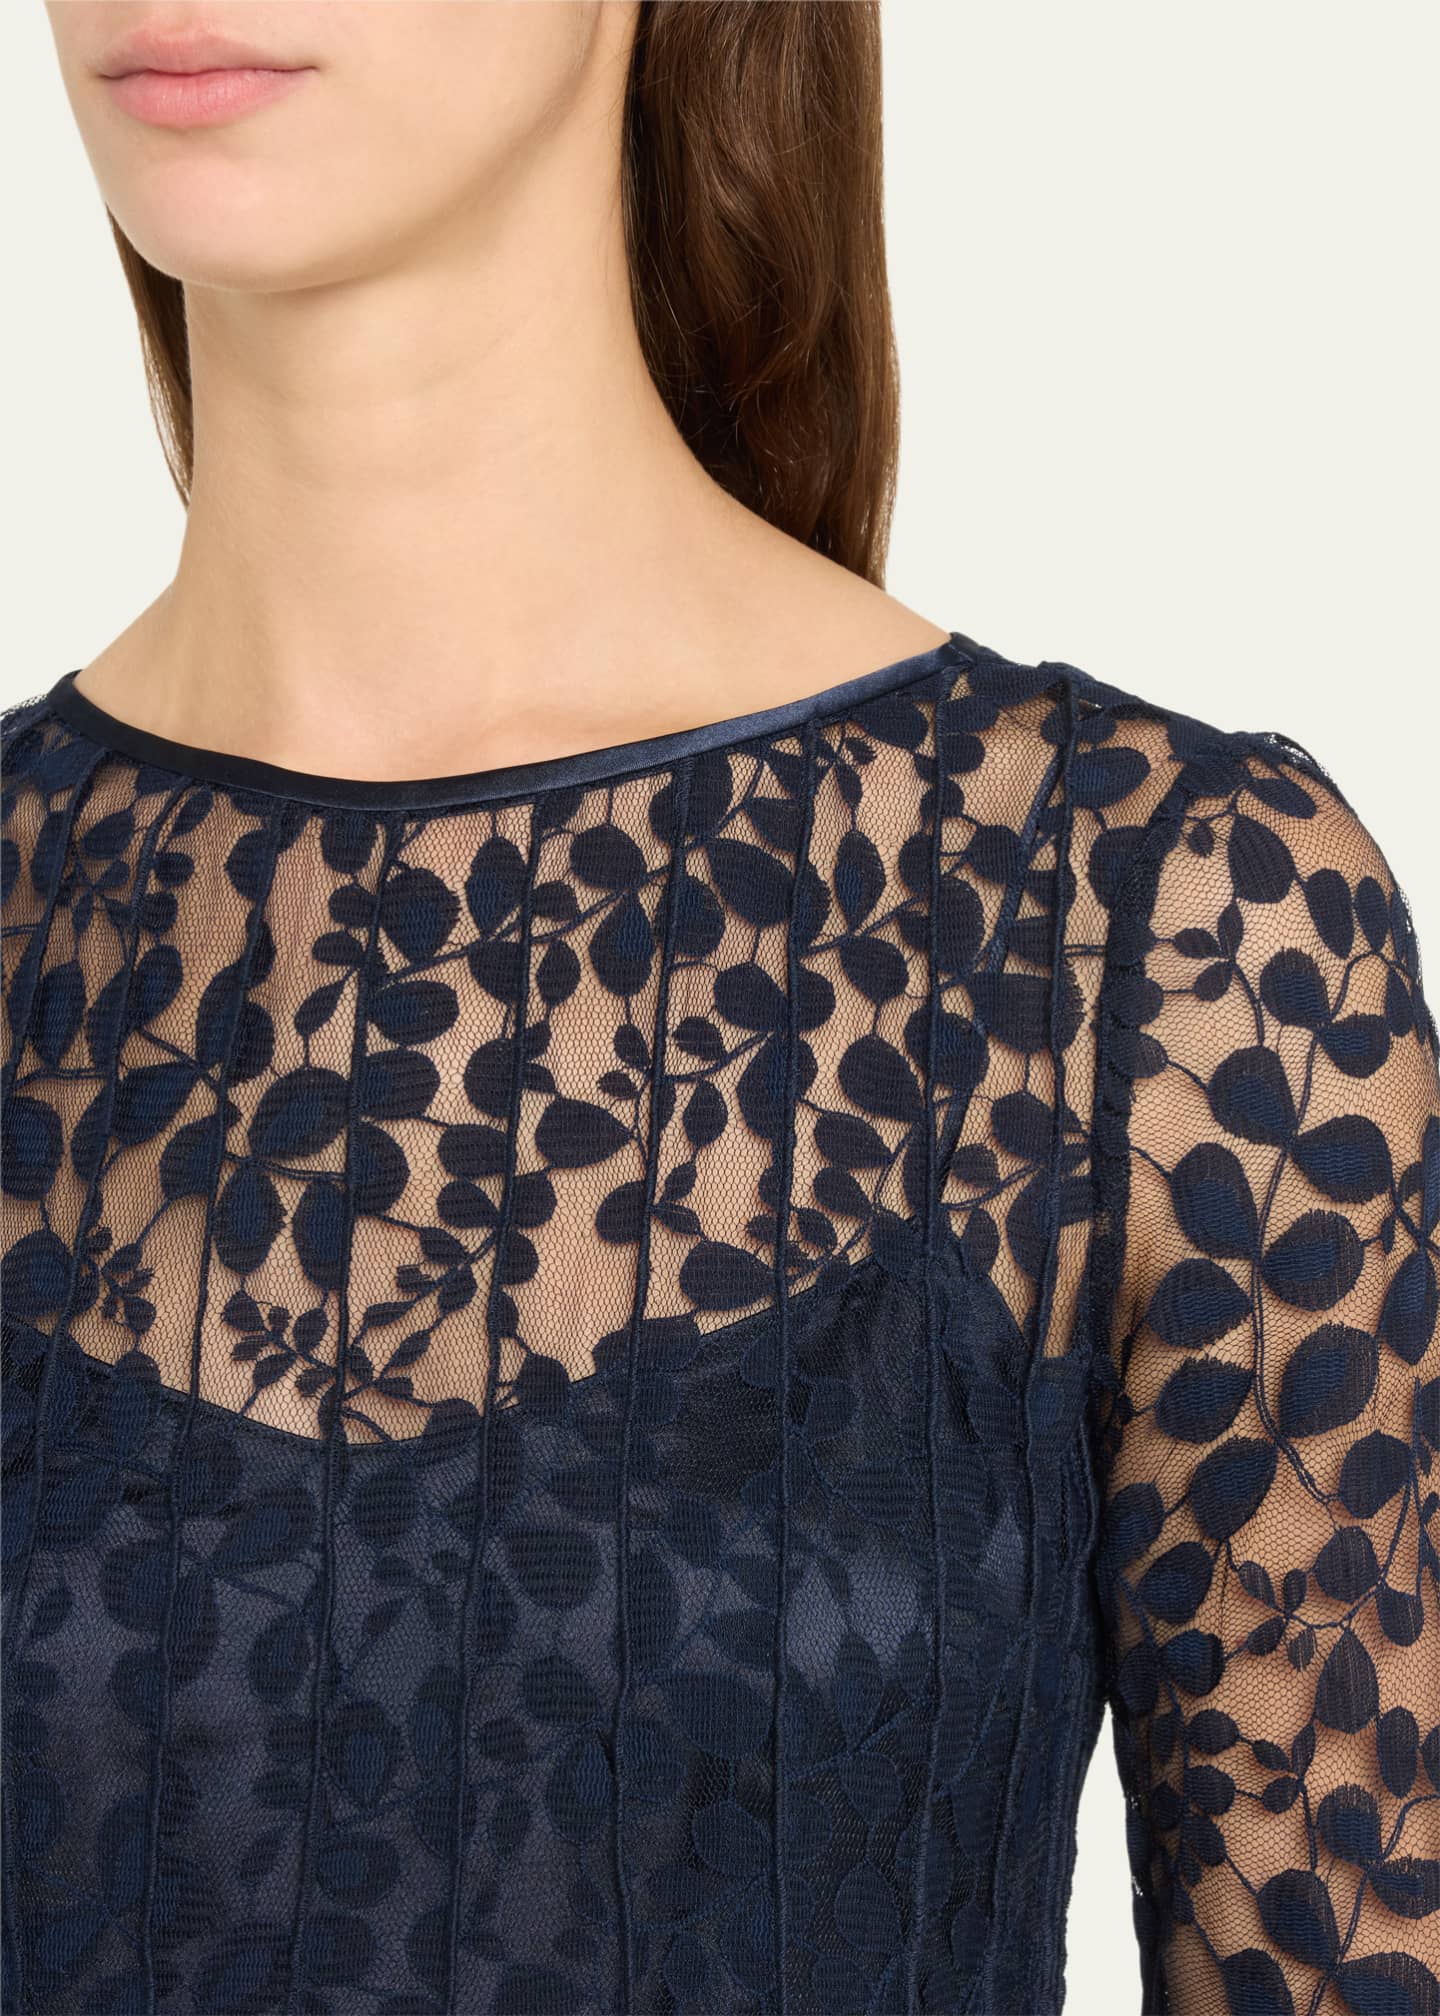 Rickie Freeman for Teri Jon Long-Sleeve A-Line Floral Lace Gown ...